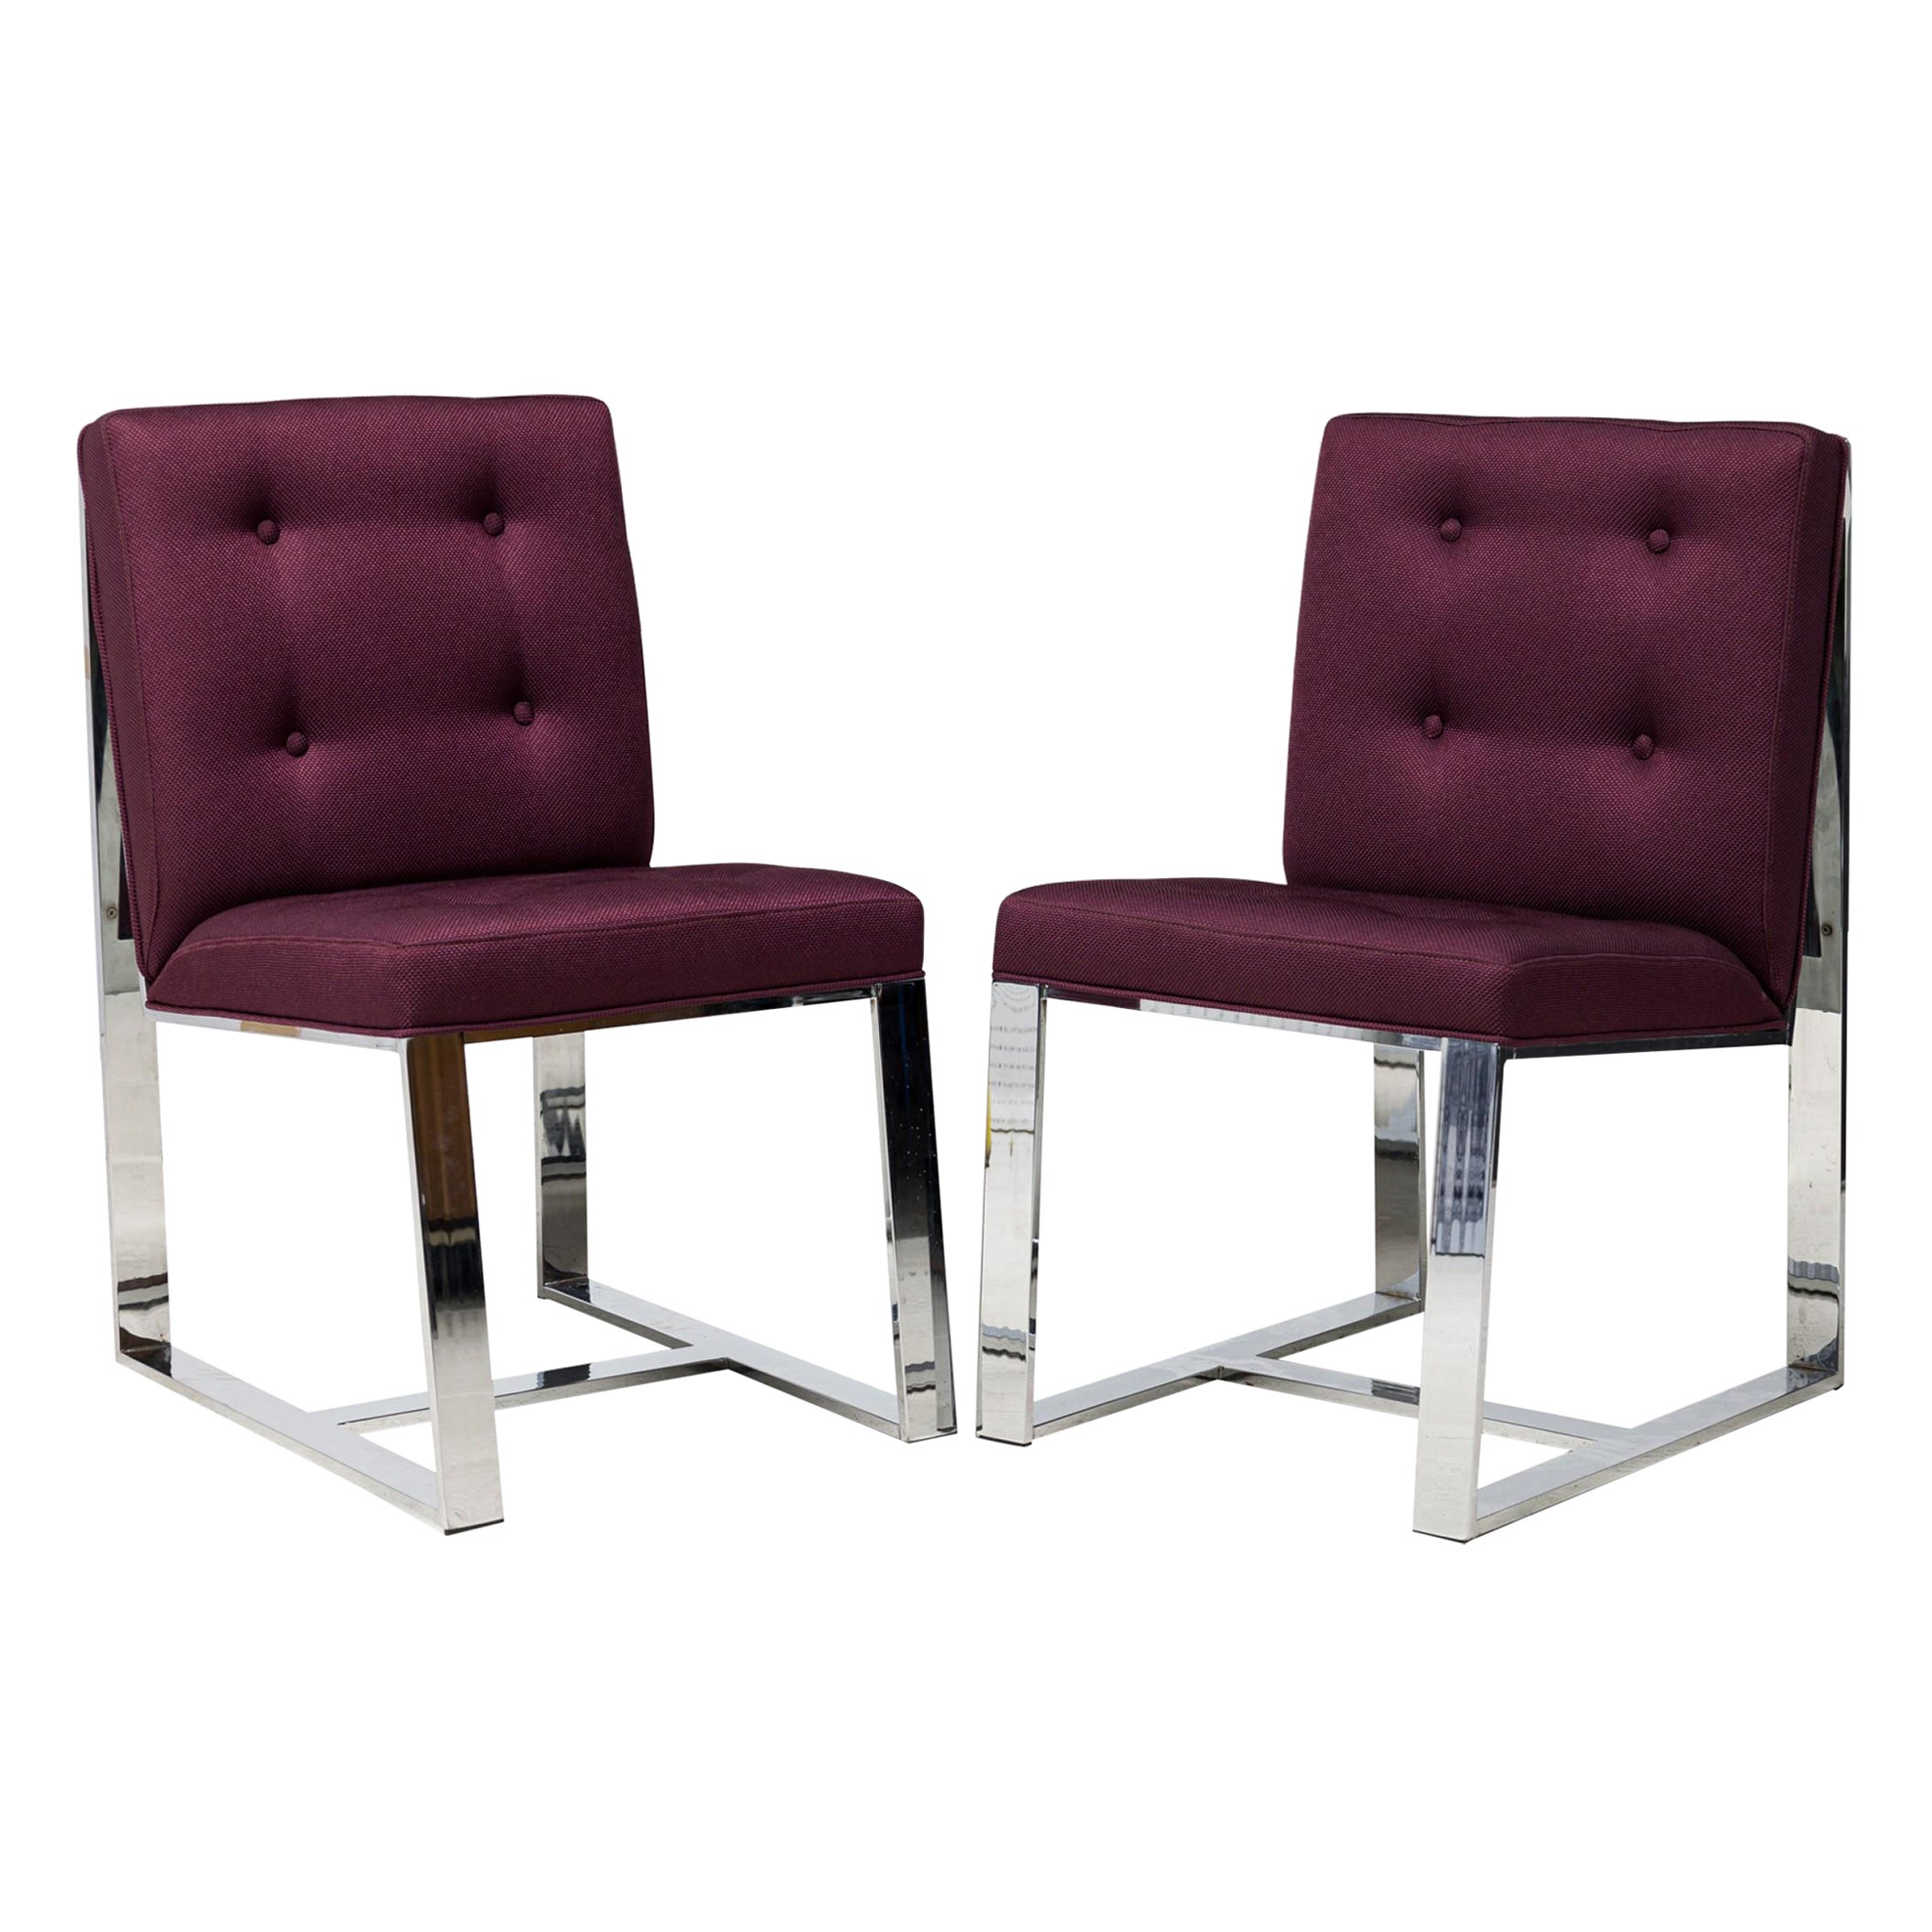 Set of 10 Milo Baughman American Polished Steel & Purple Upholstered Side Chairs